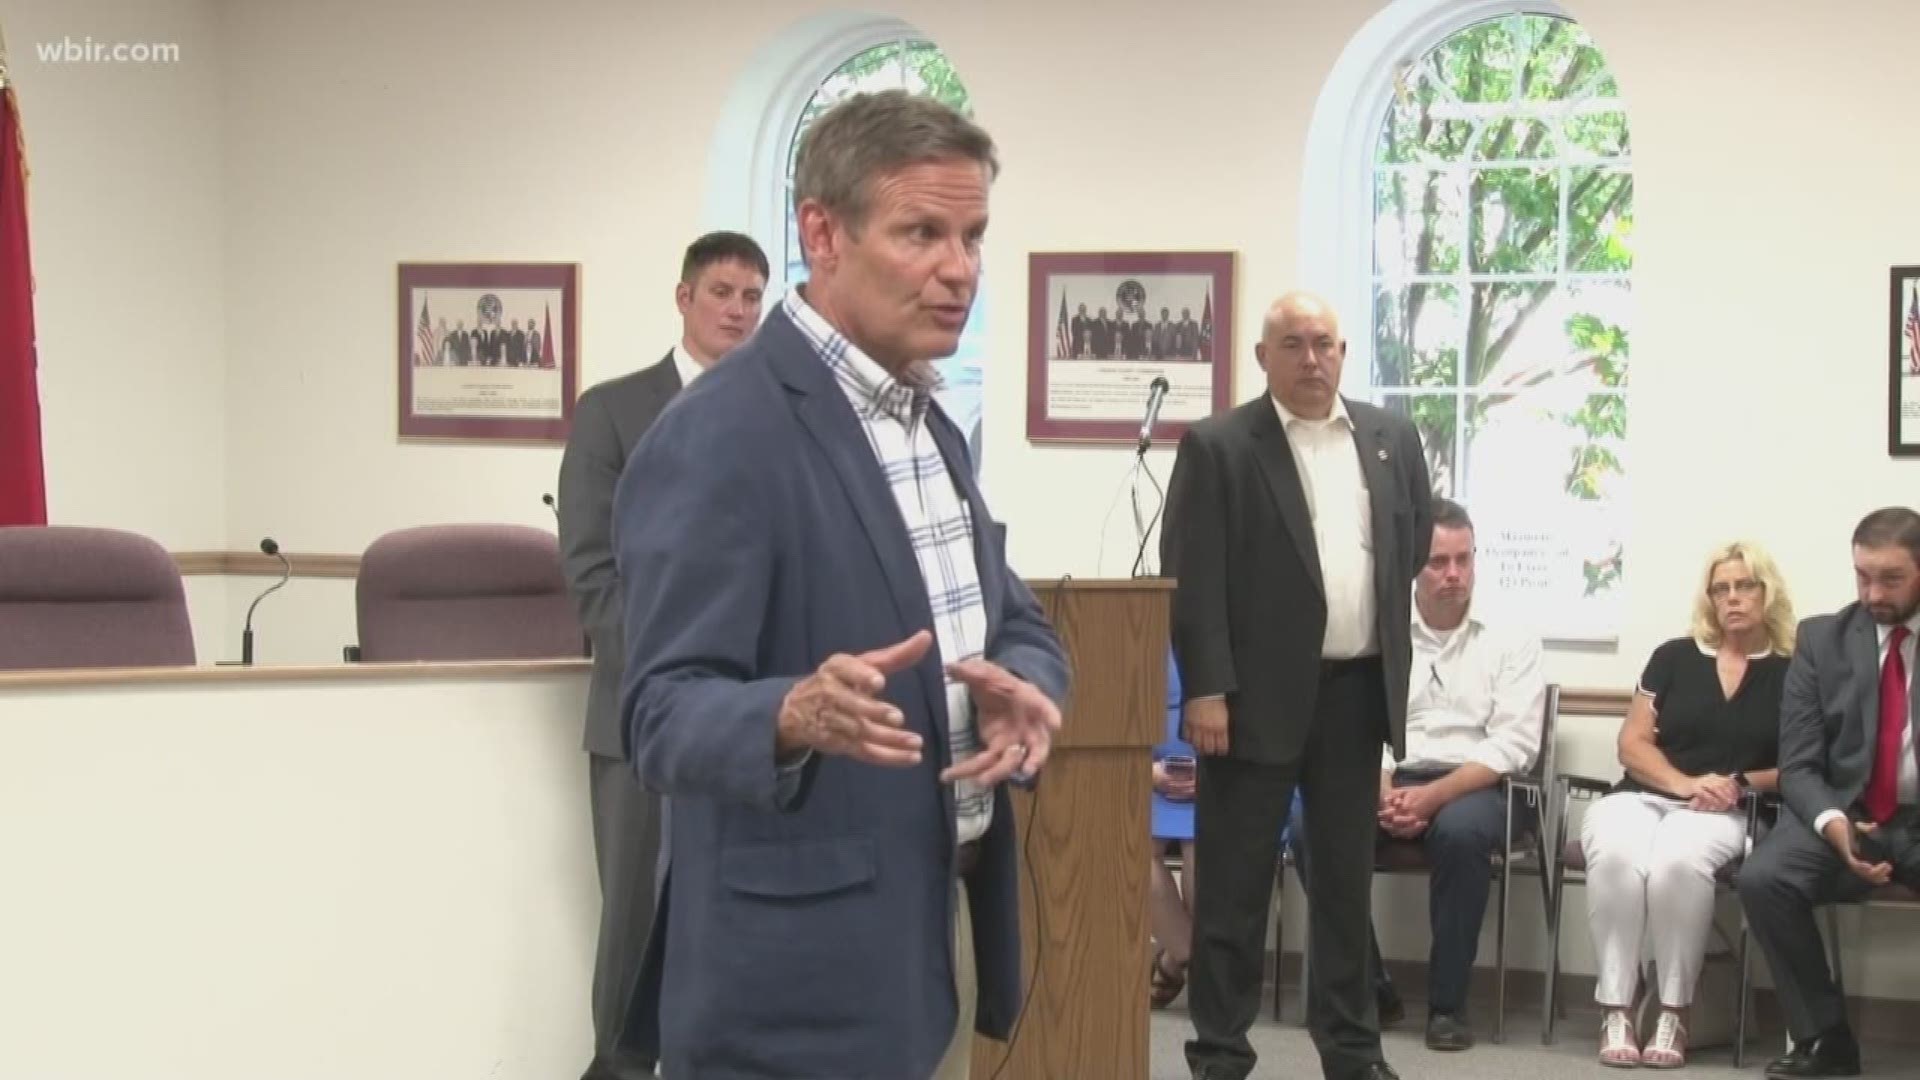 Governor Bill Lee says he will continue to work to bring jobs to Tennessee. The governor recently returned from a trip to Japan to lure more companies to invest here.